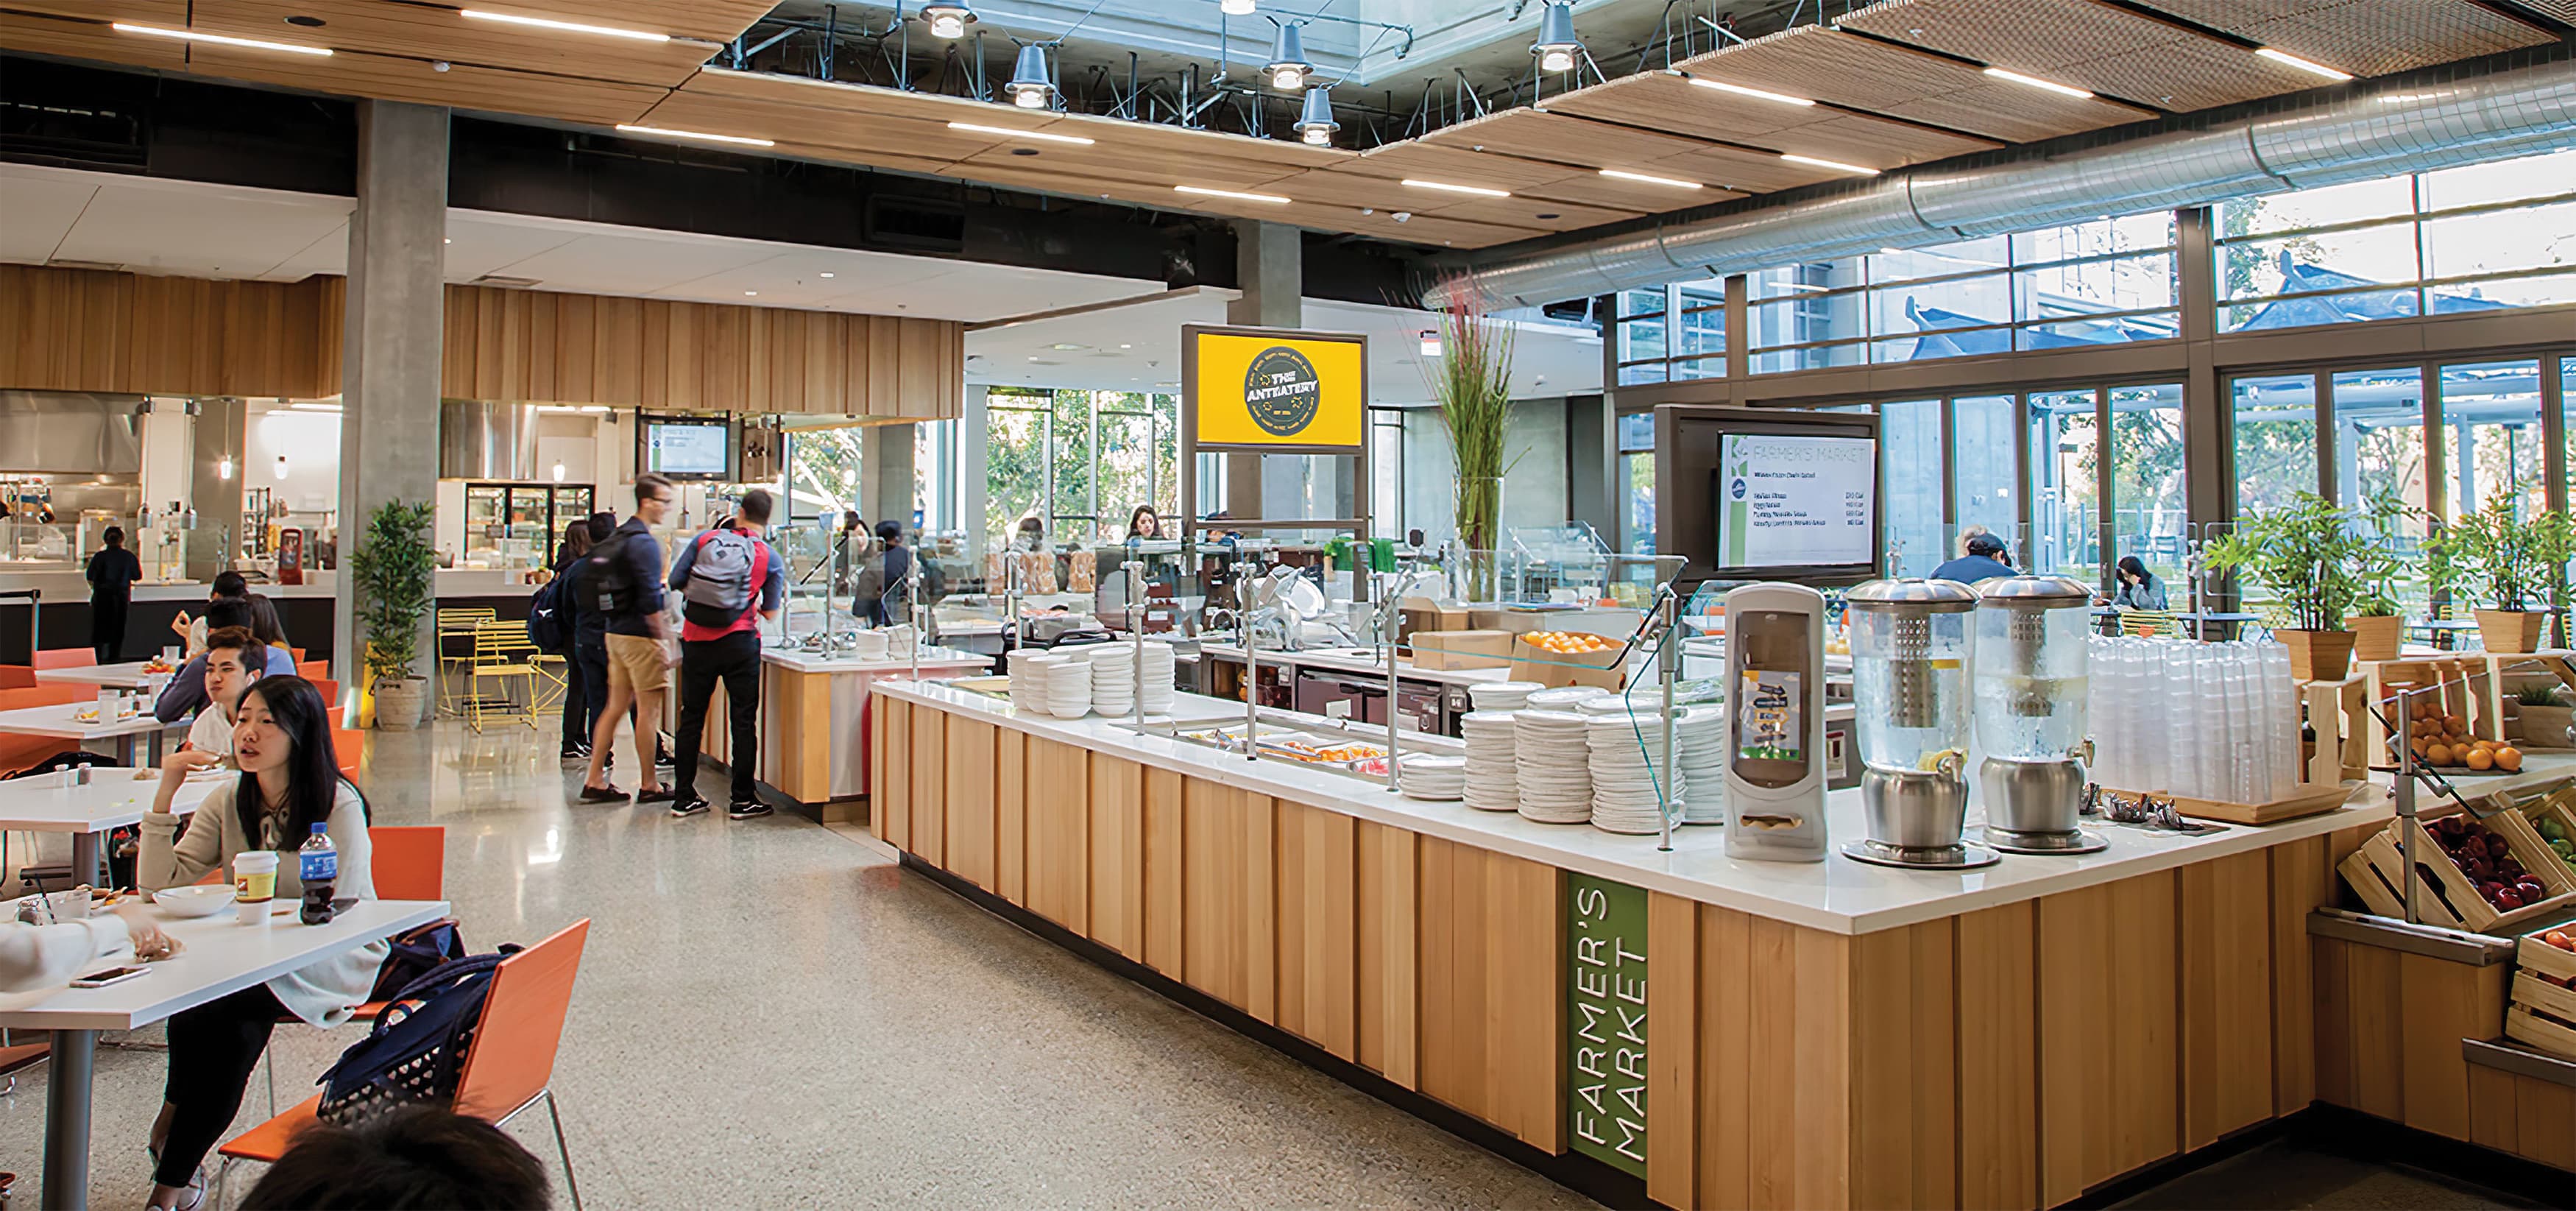 Anteatery Foodhall, the campus dining facility at University of California, Irvine. RSM Design worked to design tenant signage and environmental graphics.